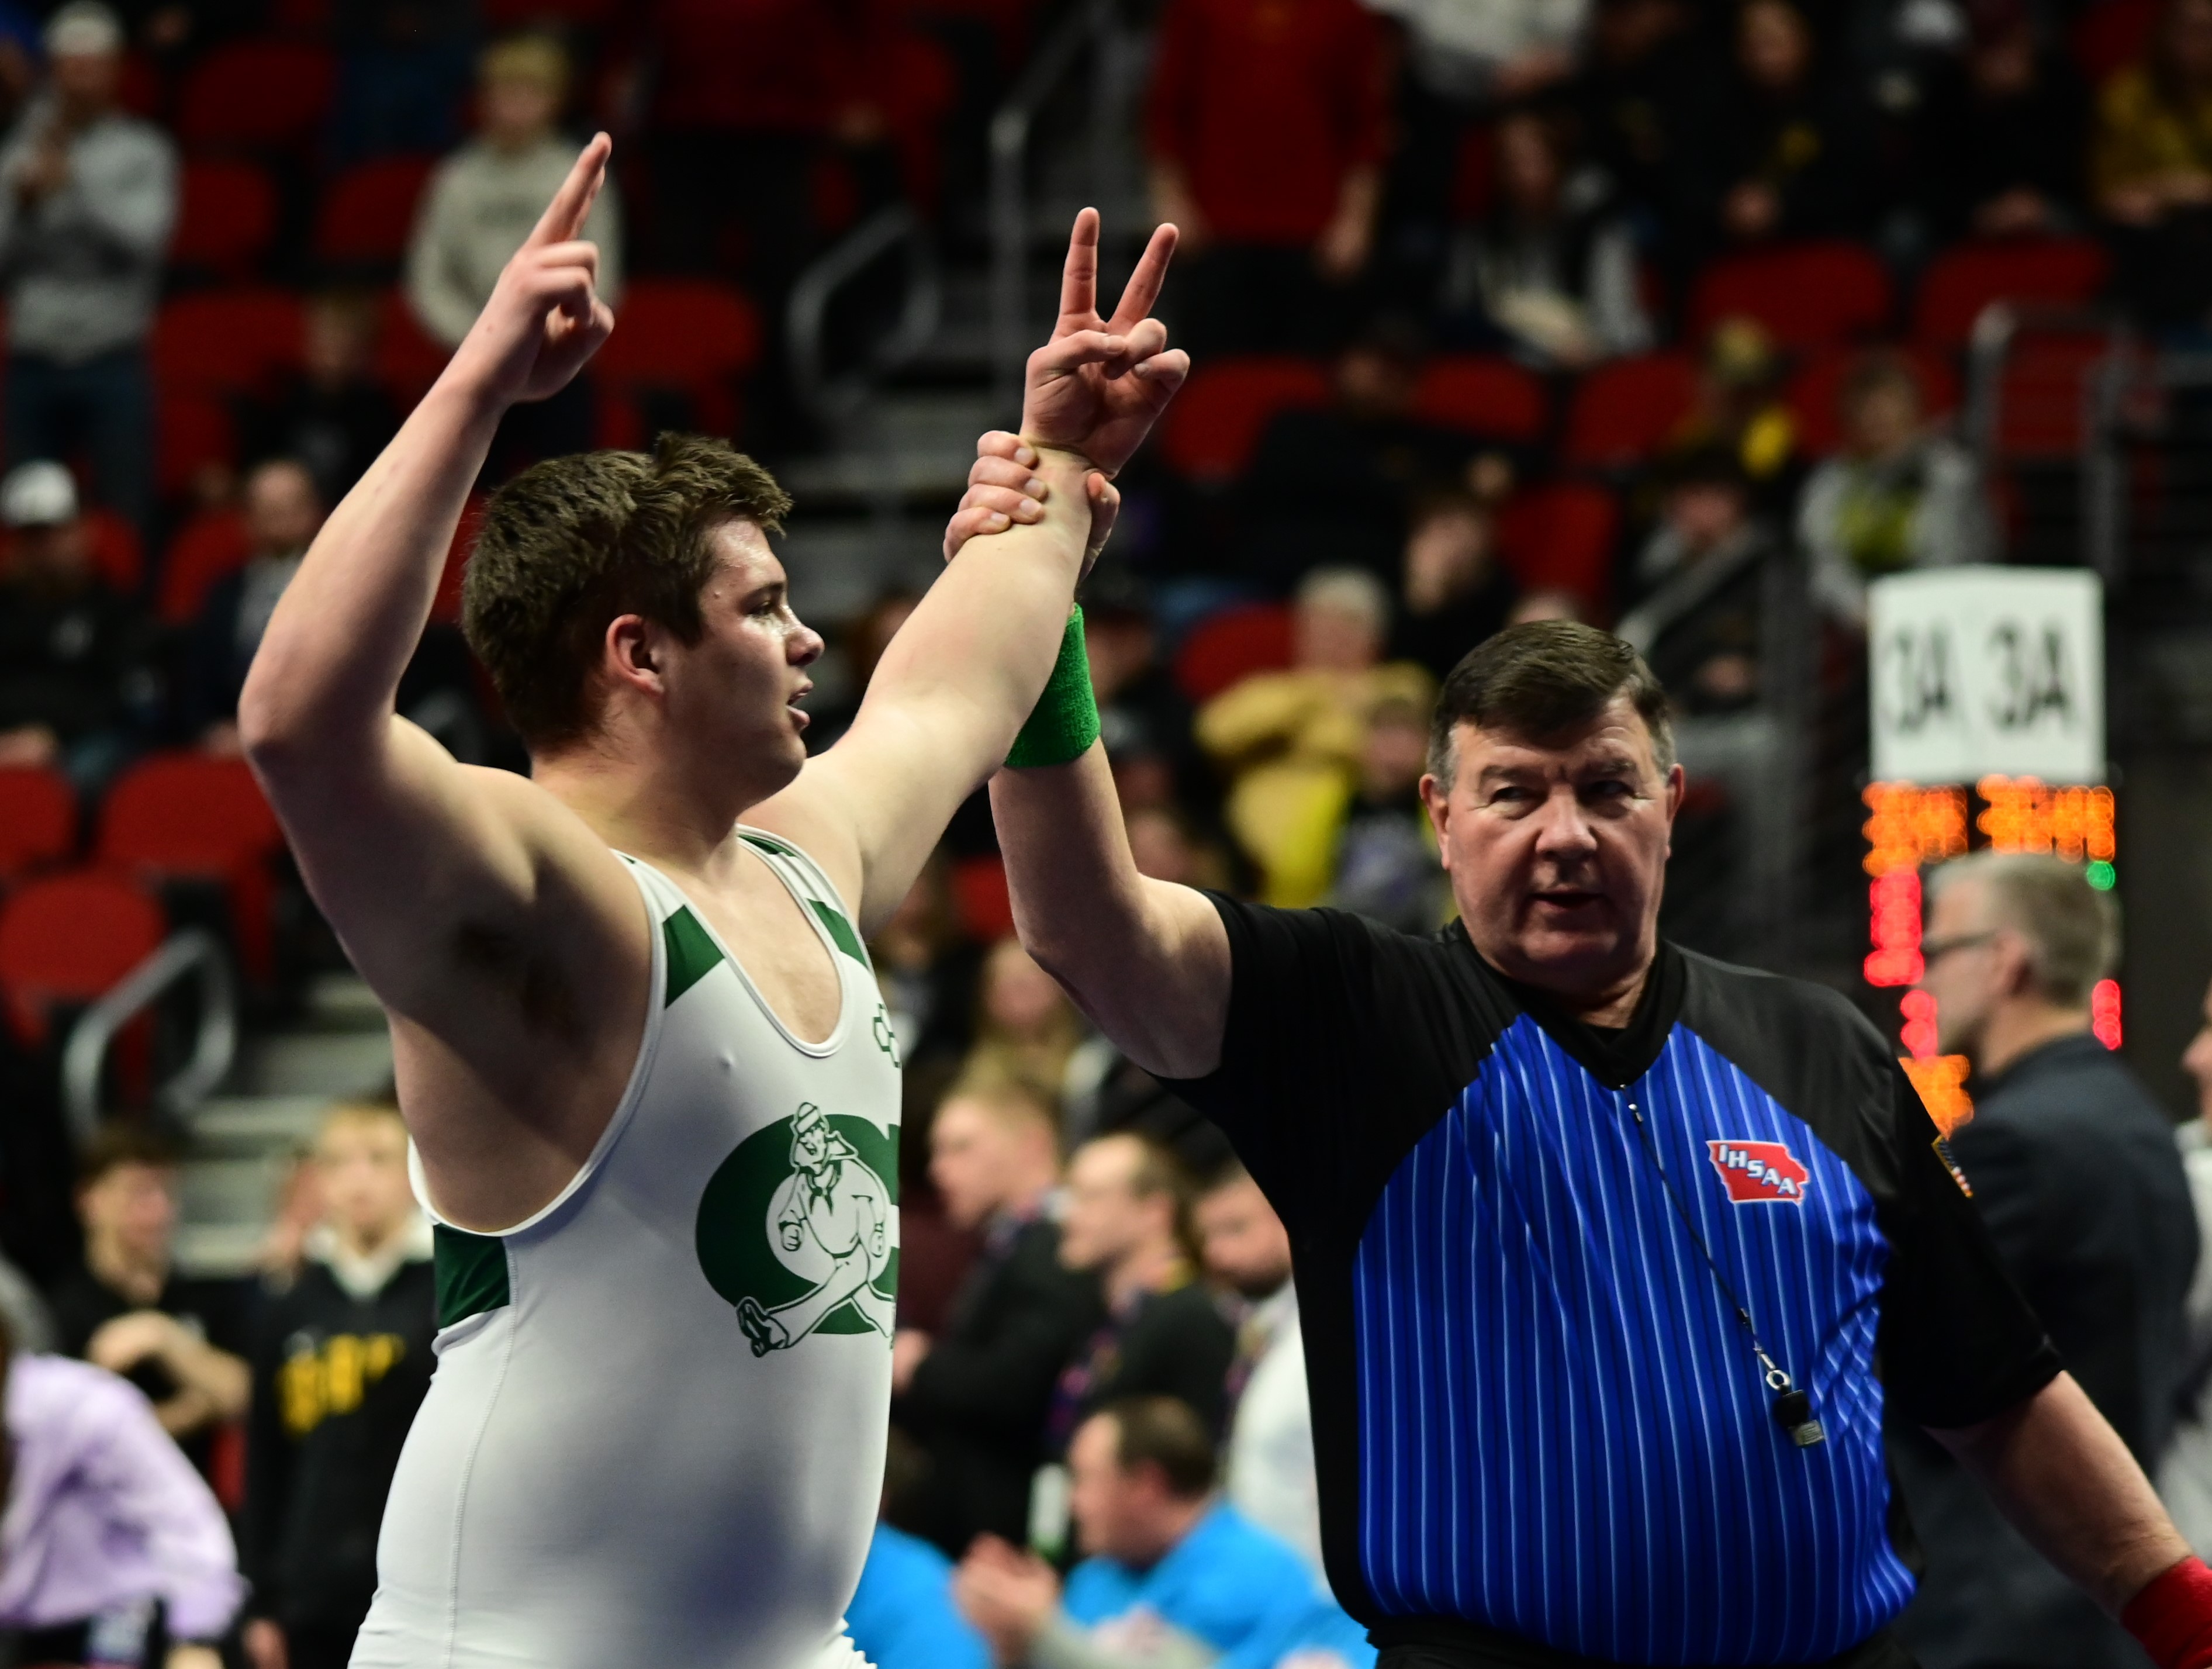 Columbus Catholic's Mason Knipp gets his hand raised after winning the Class 1A 285-pound state championship for his second consecutive state title during the Iowa high school state tournament at Wells Fargo Arena in Des Moines on Saturday. (Photo by Ryan Timmerman)